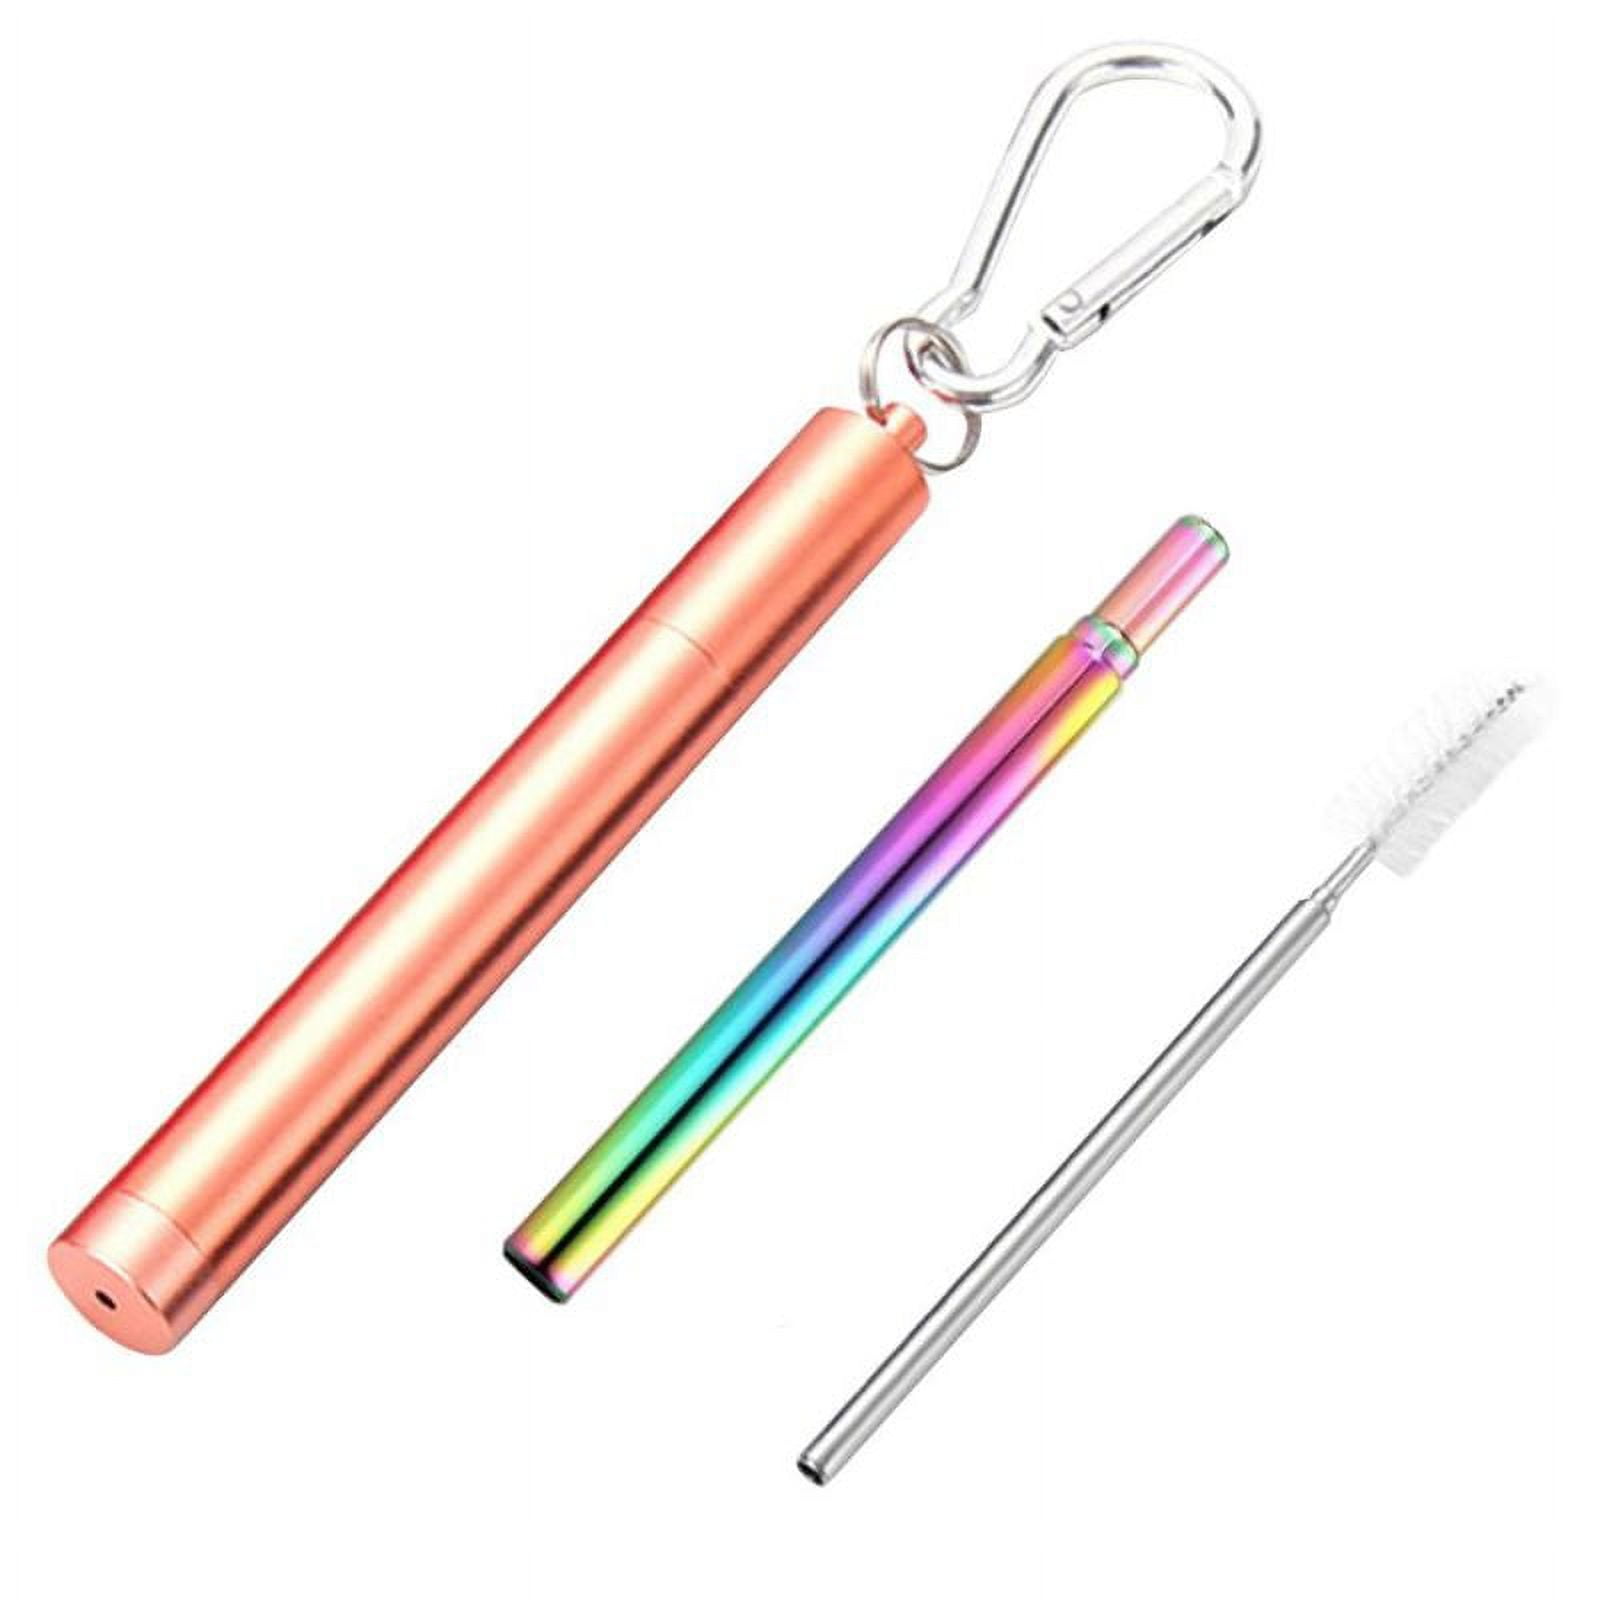 2 Pack Reusable Metal Straws Collapsible Stainless Steel Drinking Straw  Travel Portable Telescopic Straw with Case,2 Cleaning Brushes Included  Black/Rose Gold Black-Rose Gold